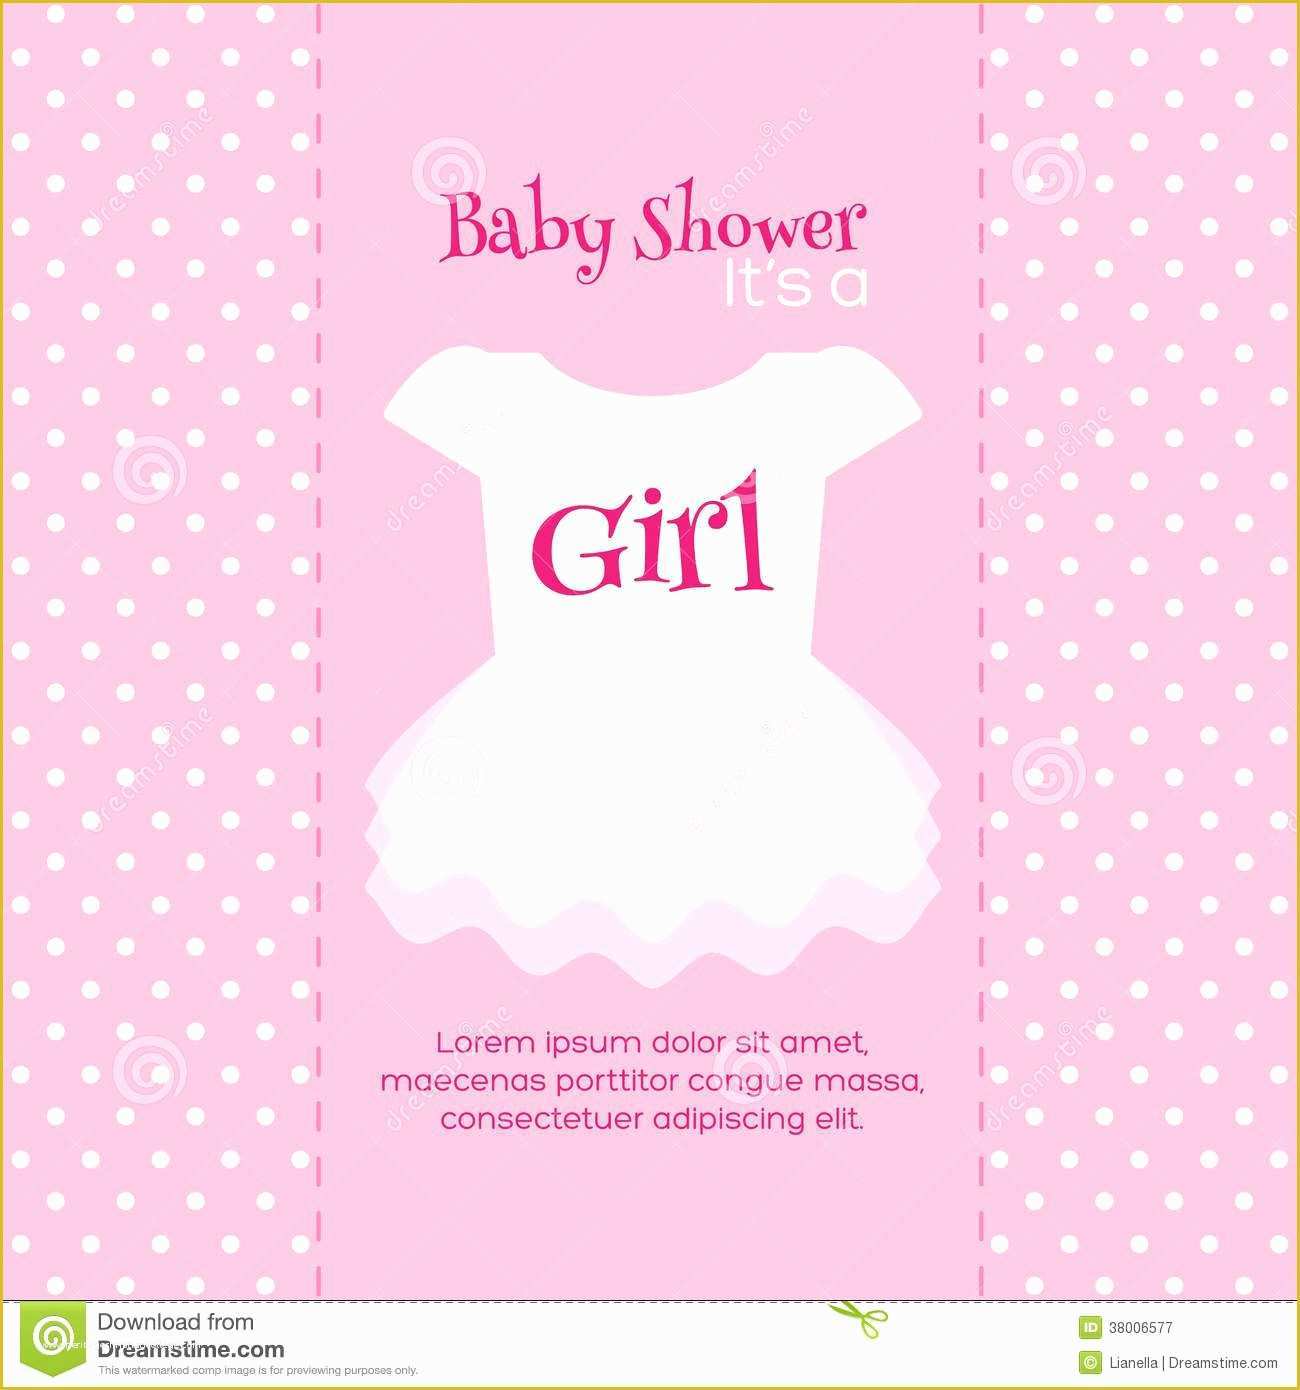 Free Printable Baby Shower Cards Templates Of Baby Shower Invitations Cards Designs Free Baby Shower